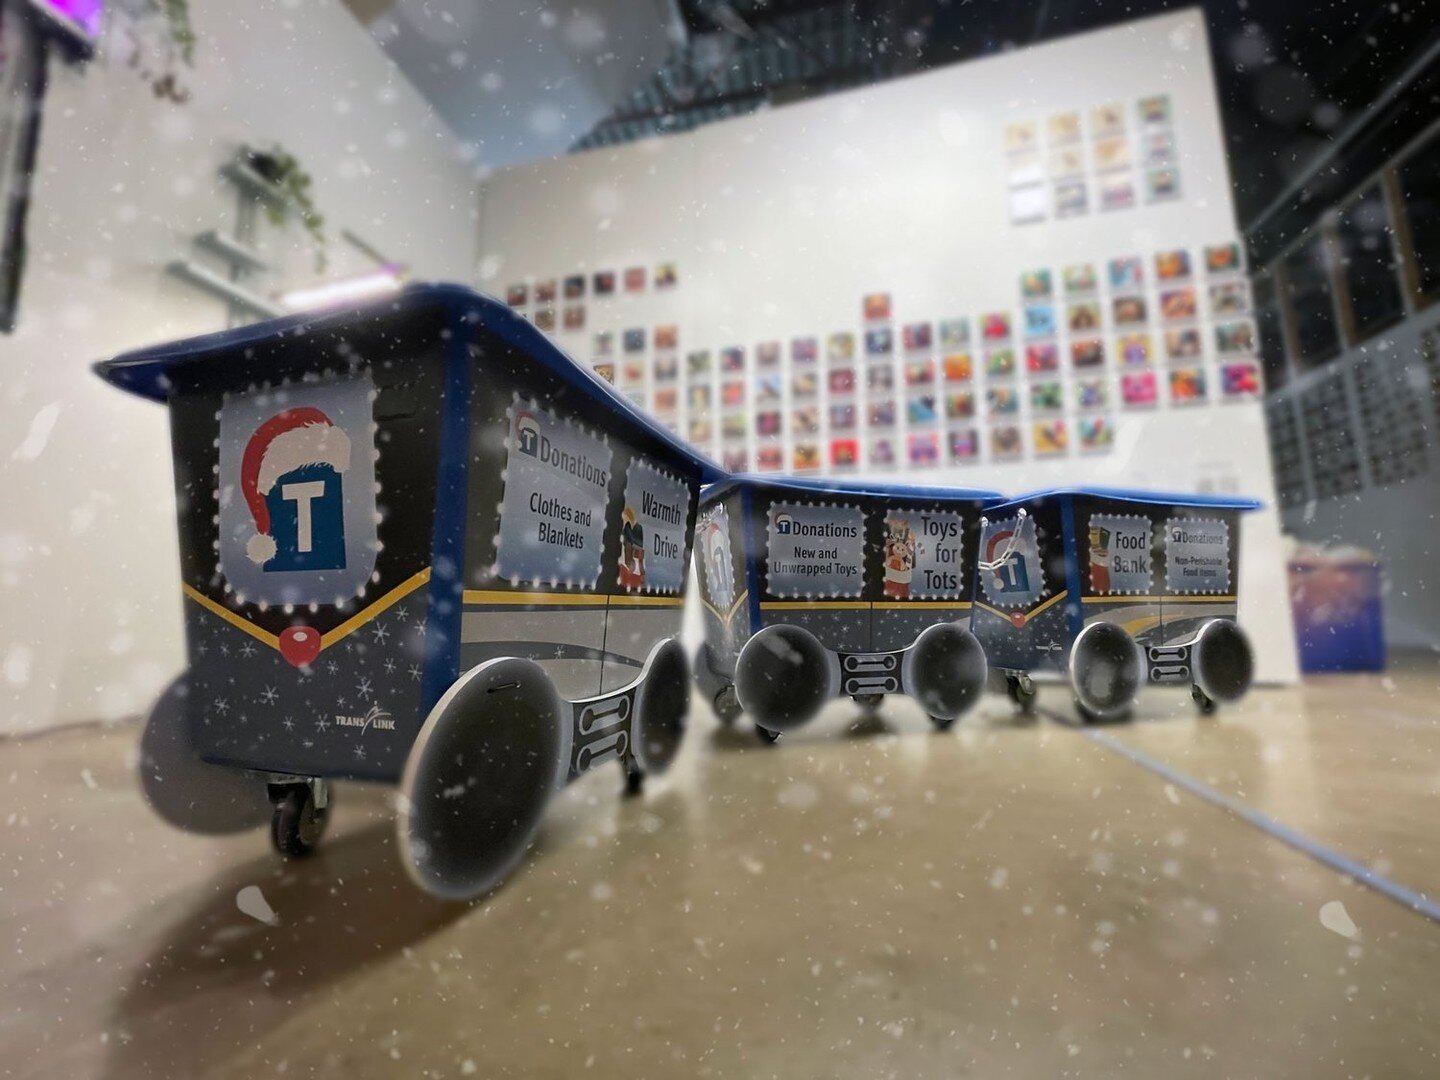 We were delighted to team up with MRG Events to create this activation as we hope it brings a lot of happiness to those in need this Christmas season.

You can check out the full project at the link below...
https://creativeothers.co/work//translink-